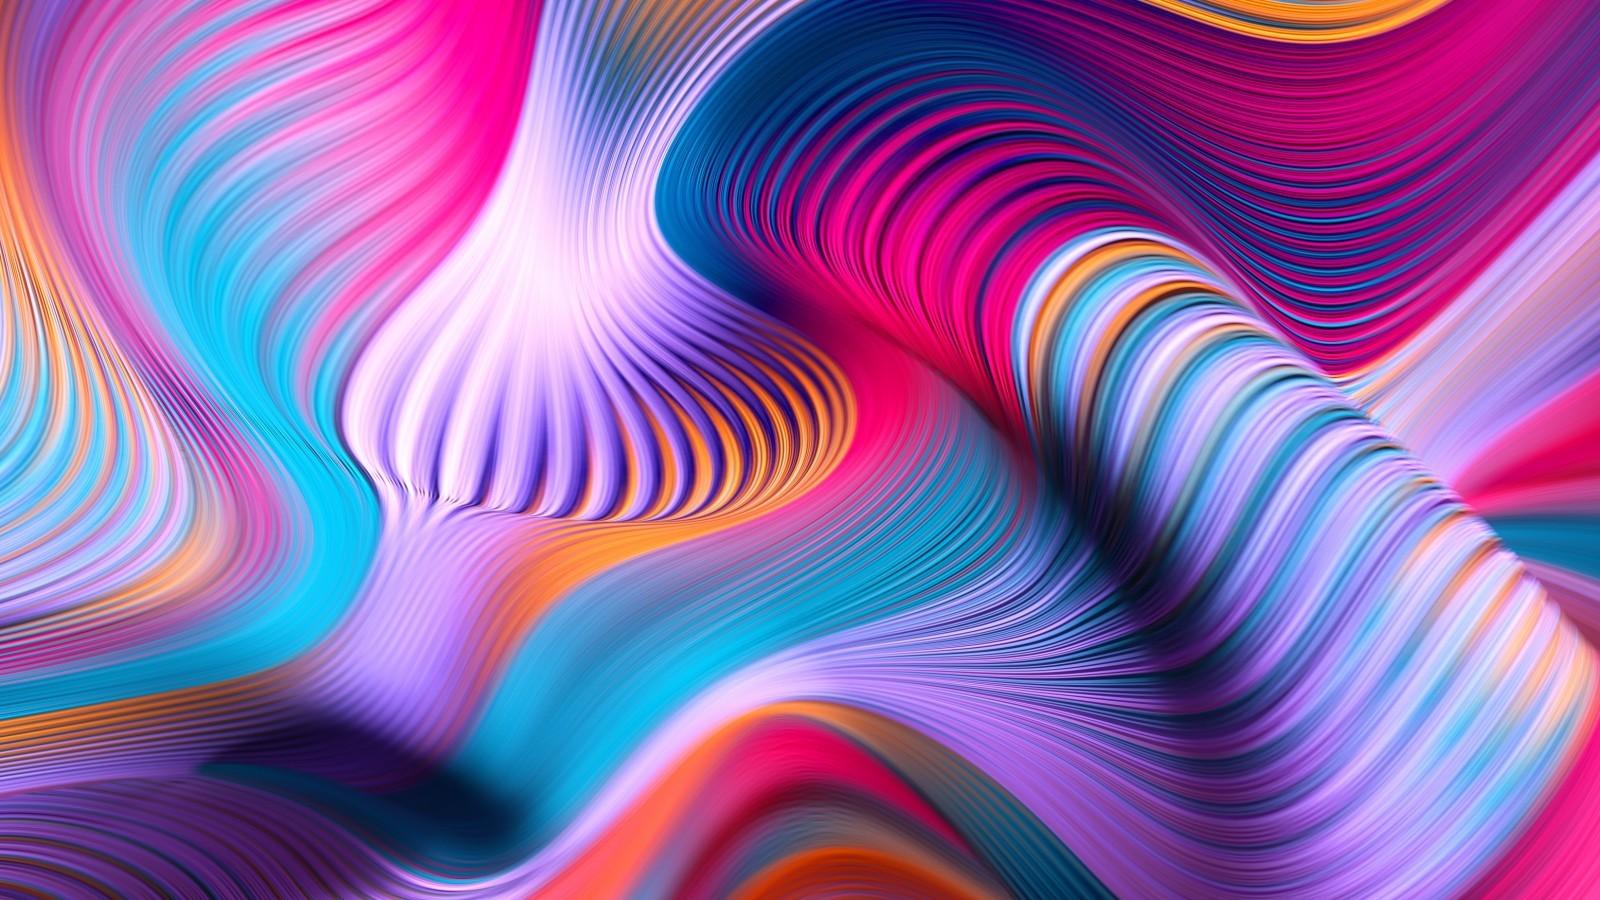 Download 1600x900 Colorful Gradient, Curly Lines, Waves Wallpaper